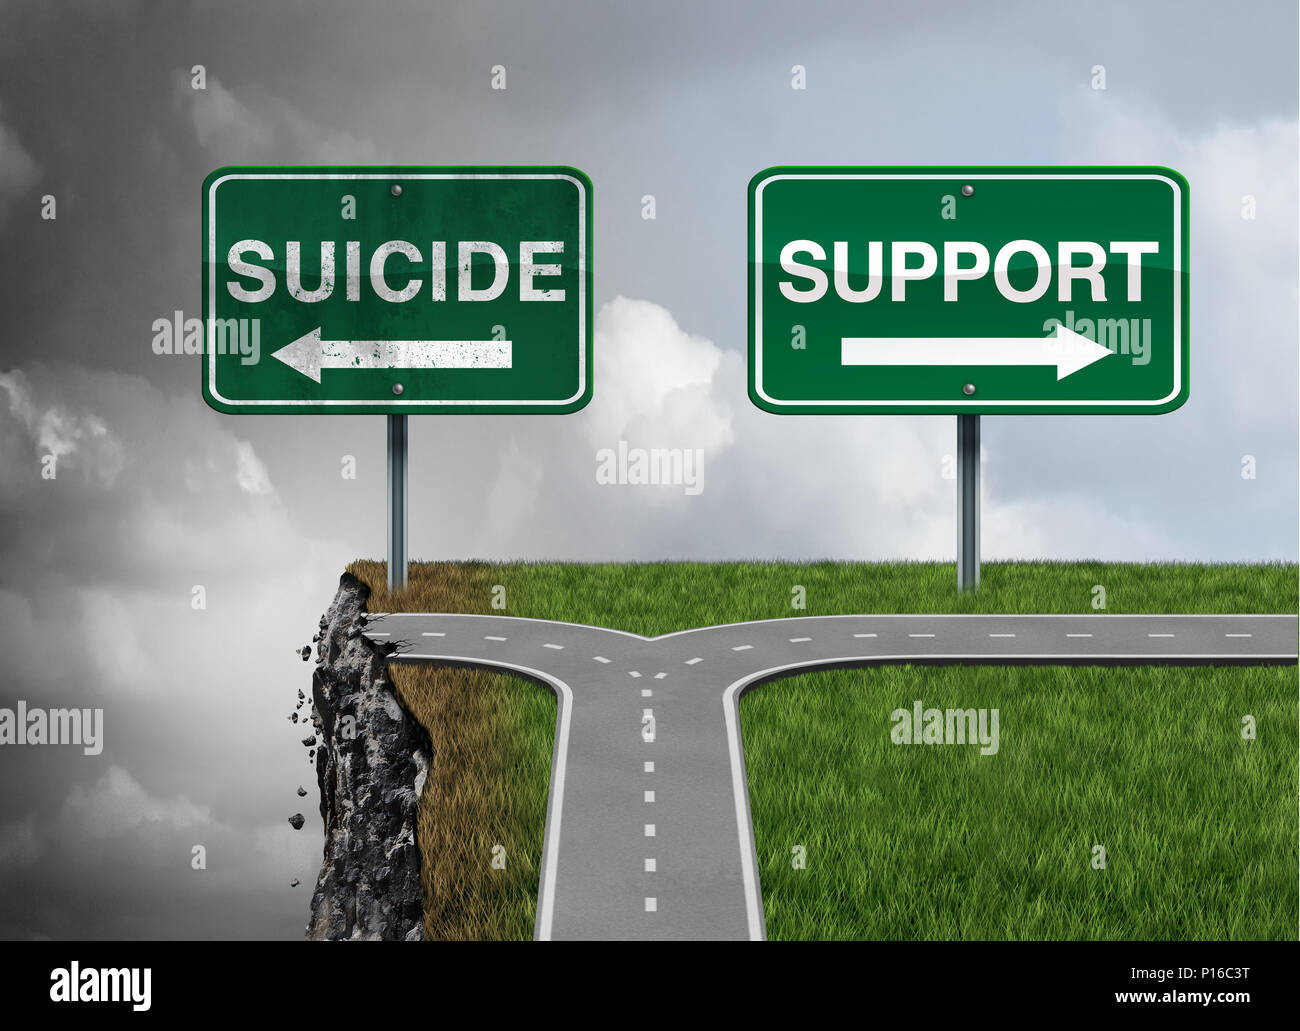 Suicide and support or severe depression risk of hopelessness as a mental illness therapy health concept as a permanent solution. Stock Photo